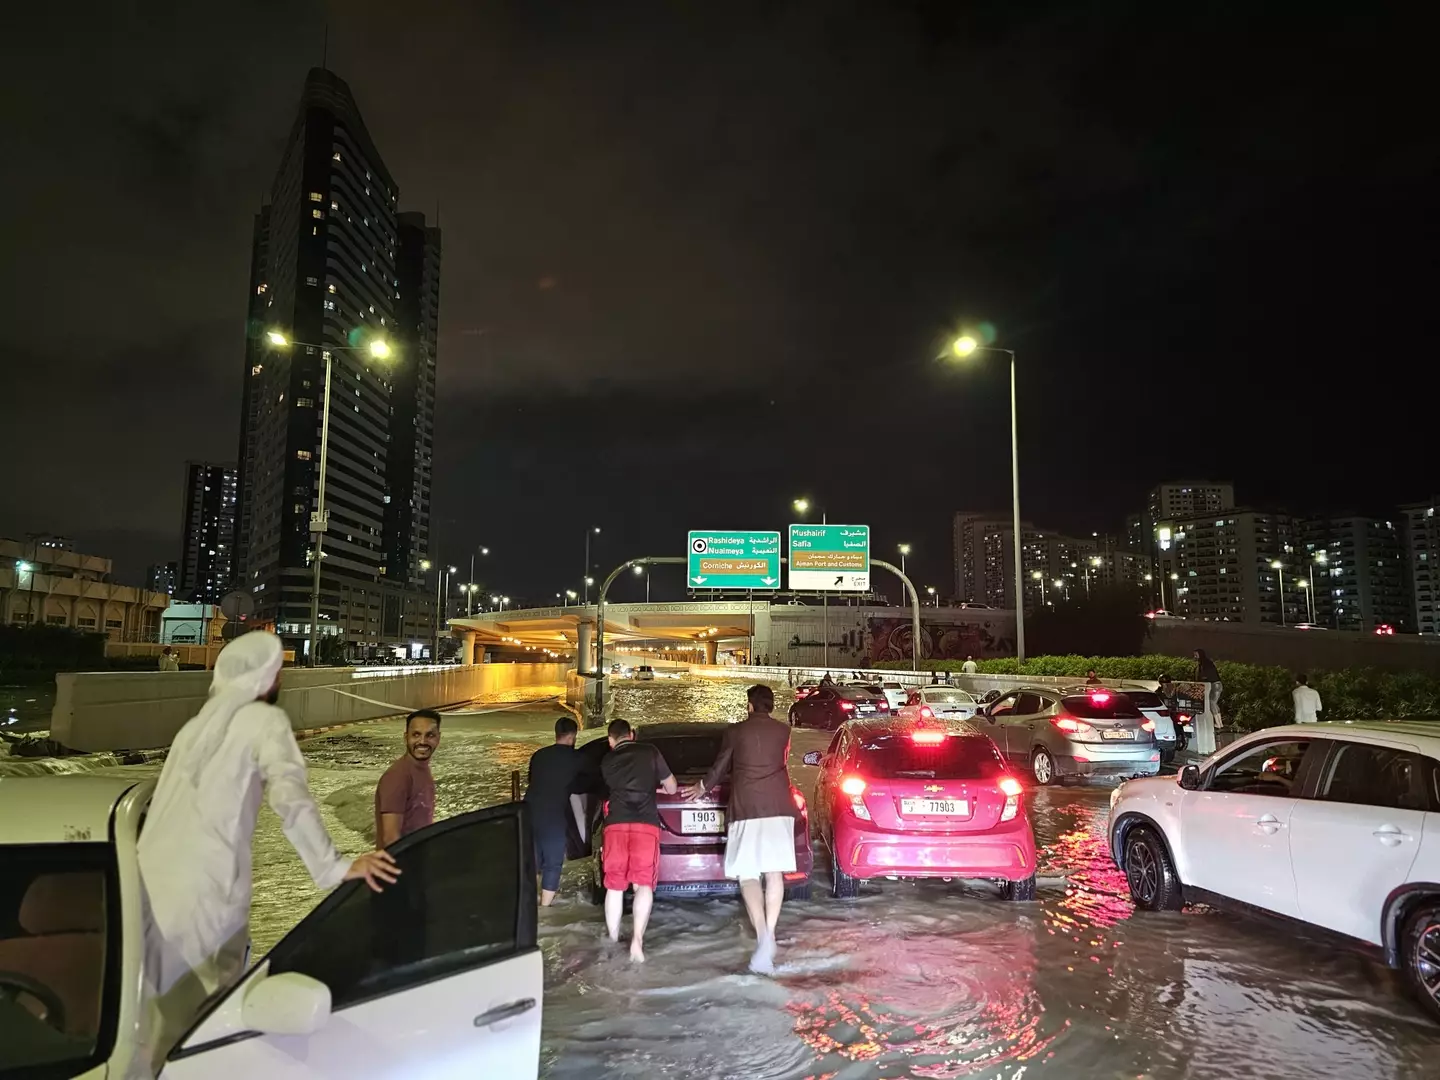 The UAE has been hit by heavy rain. (Stringer/Anadolu via Getty Images)